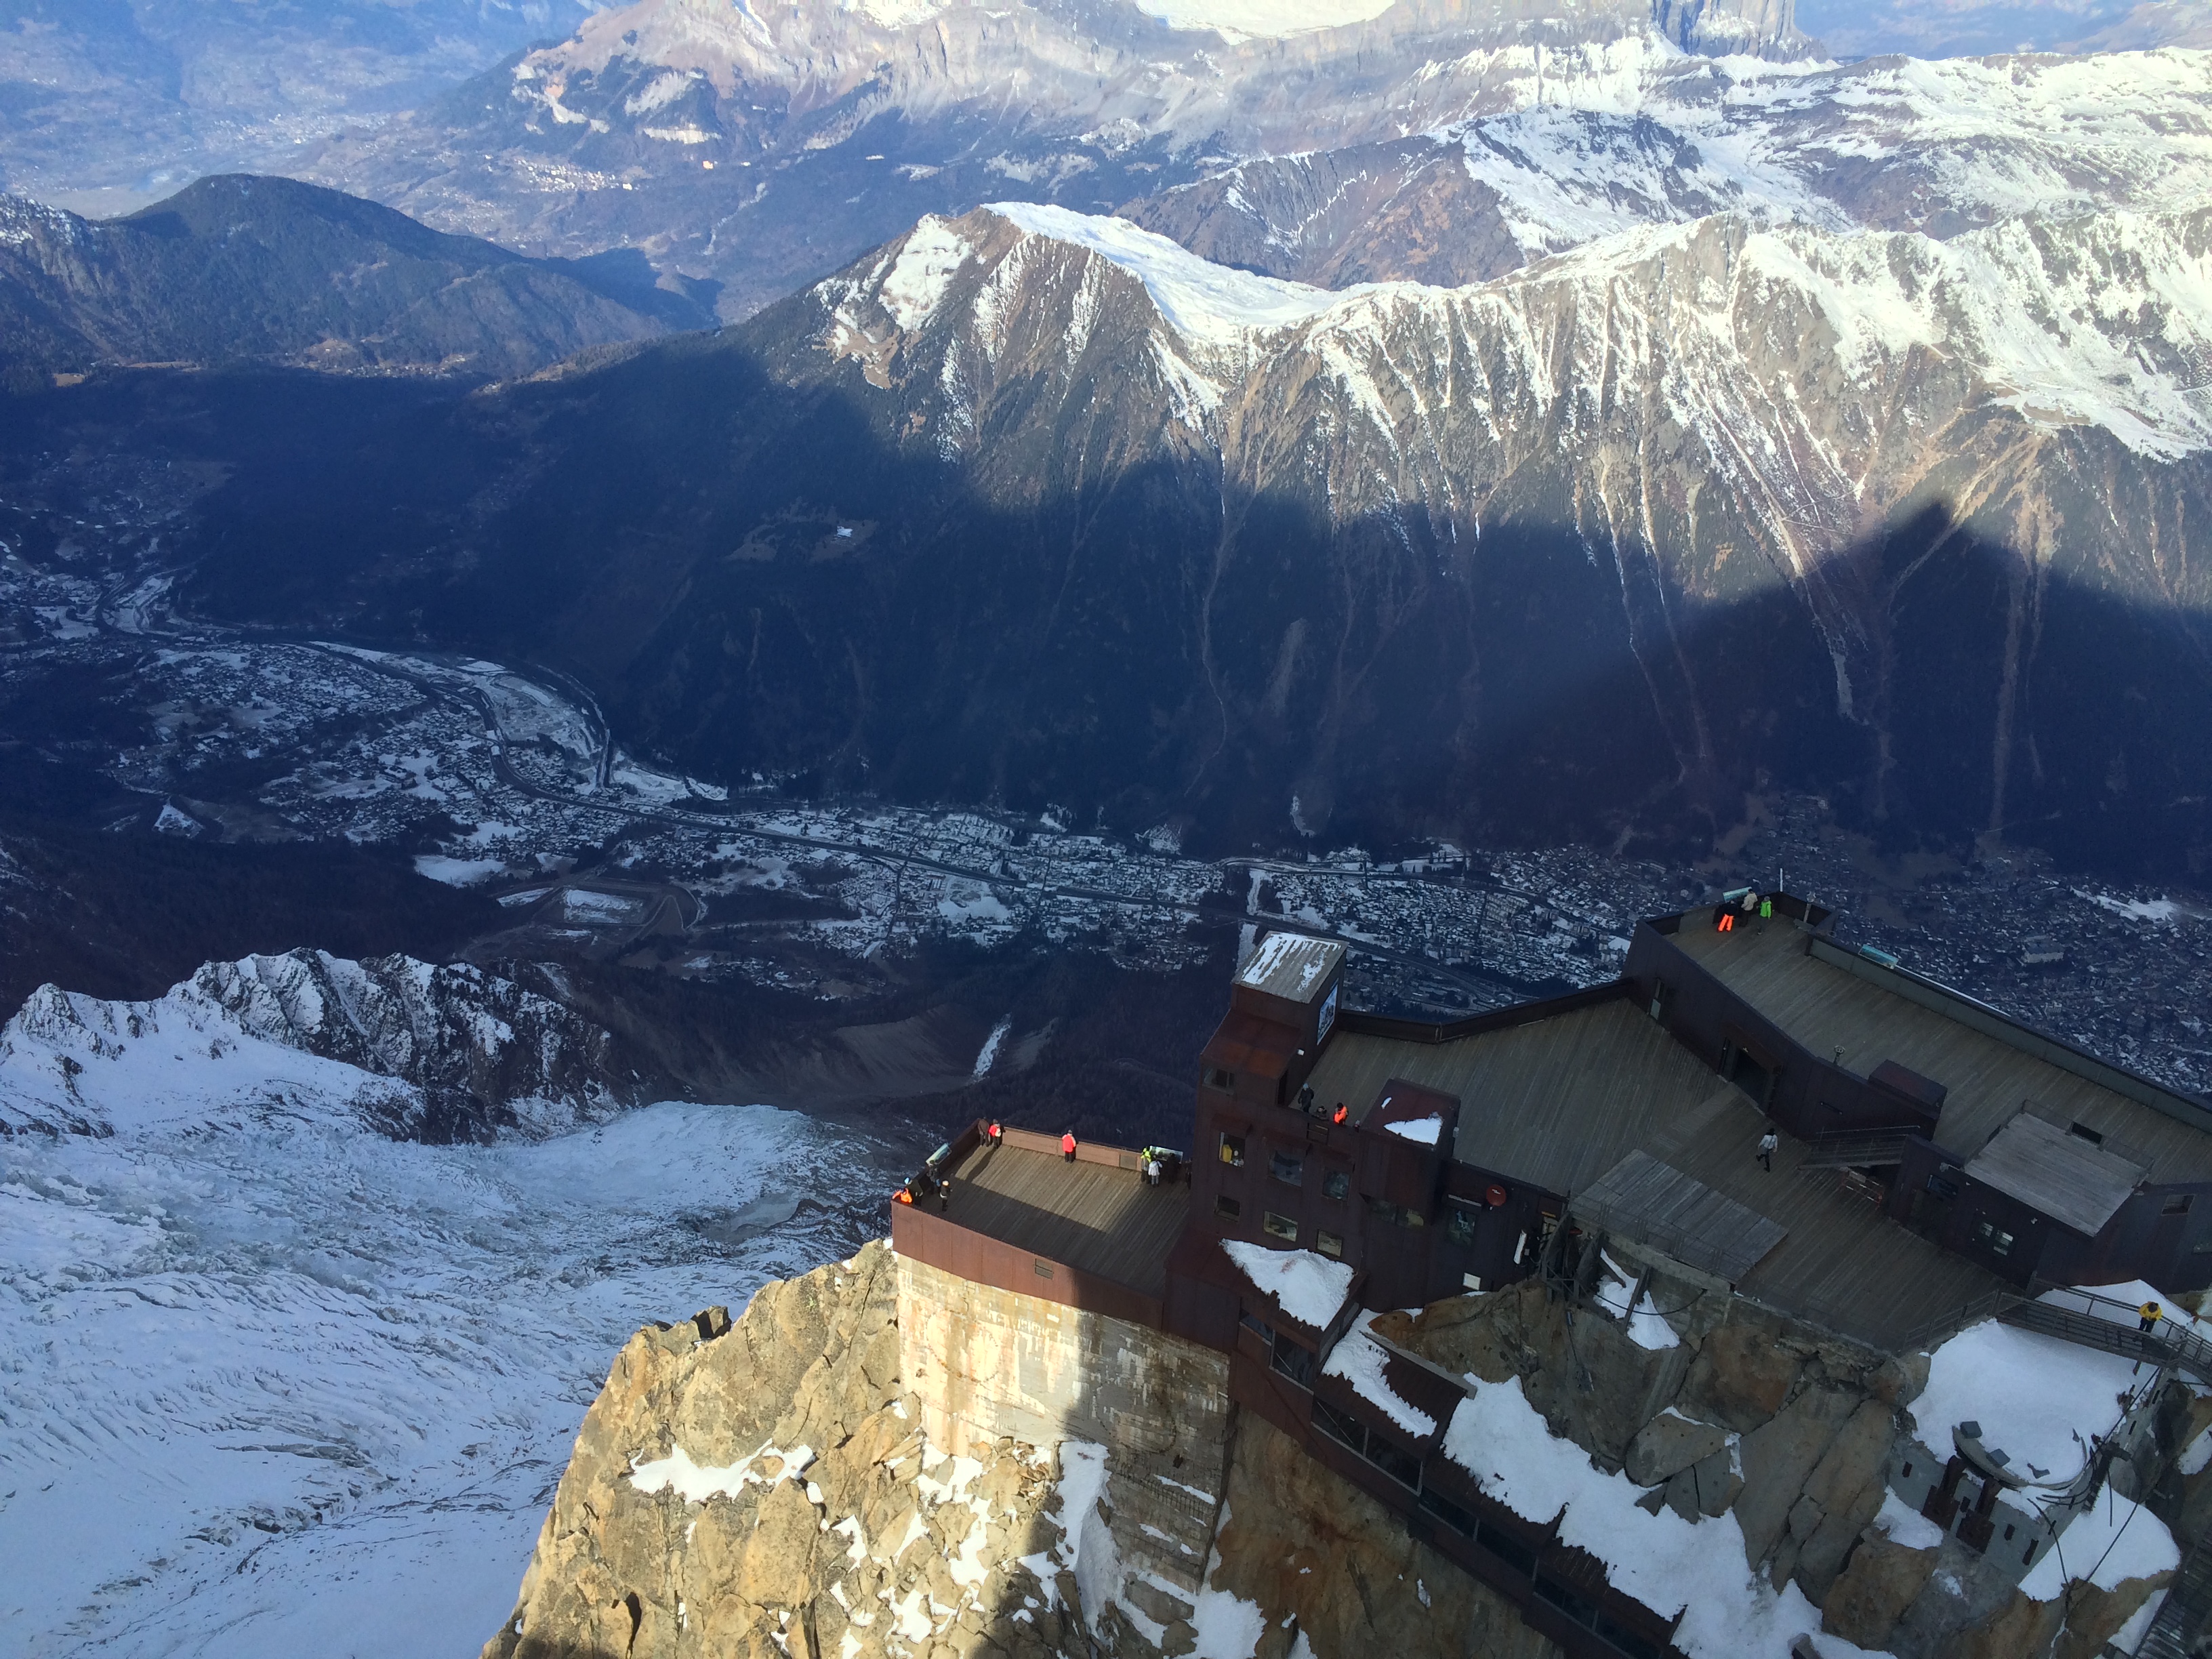 View from the Aguille du Midi